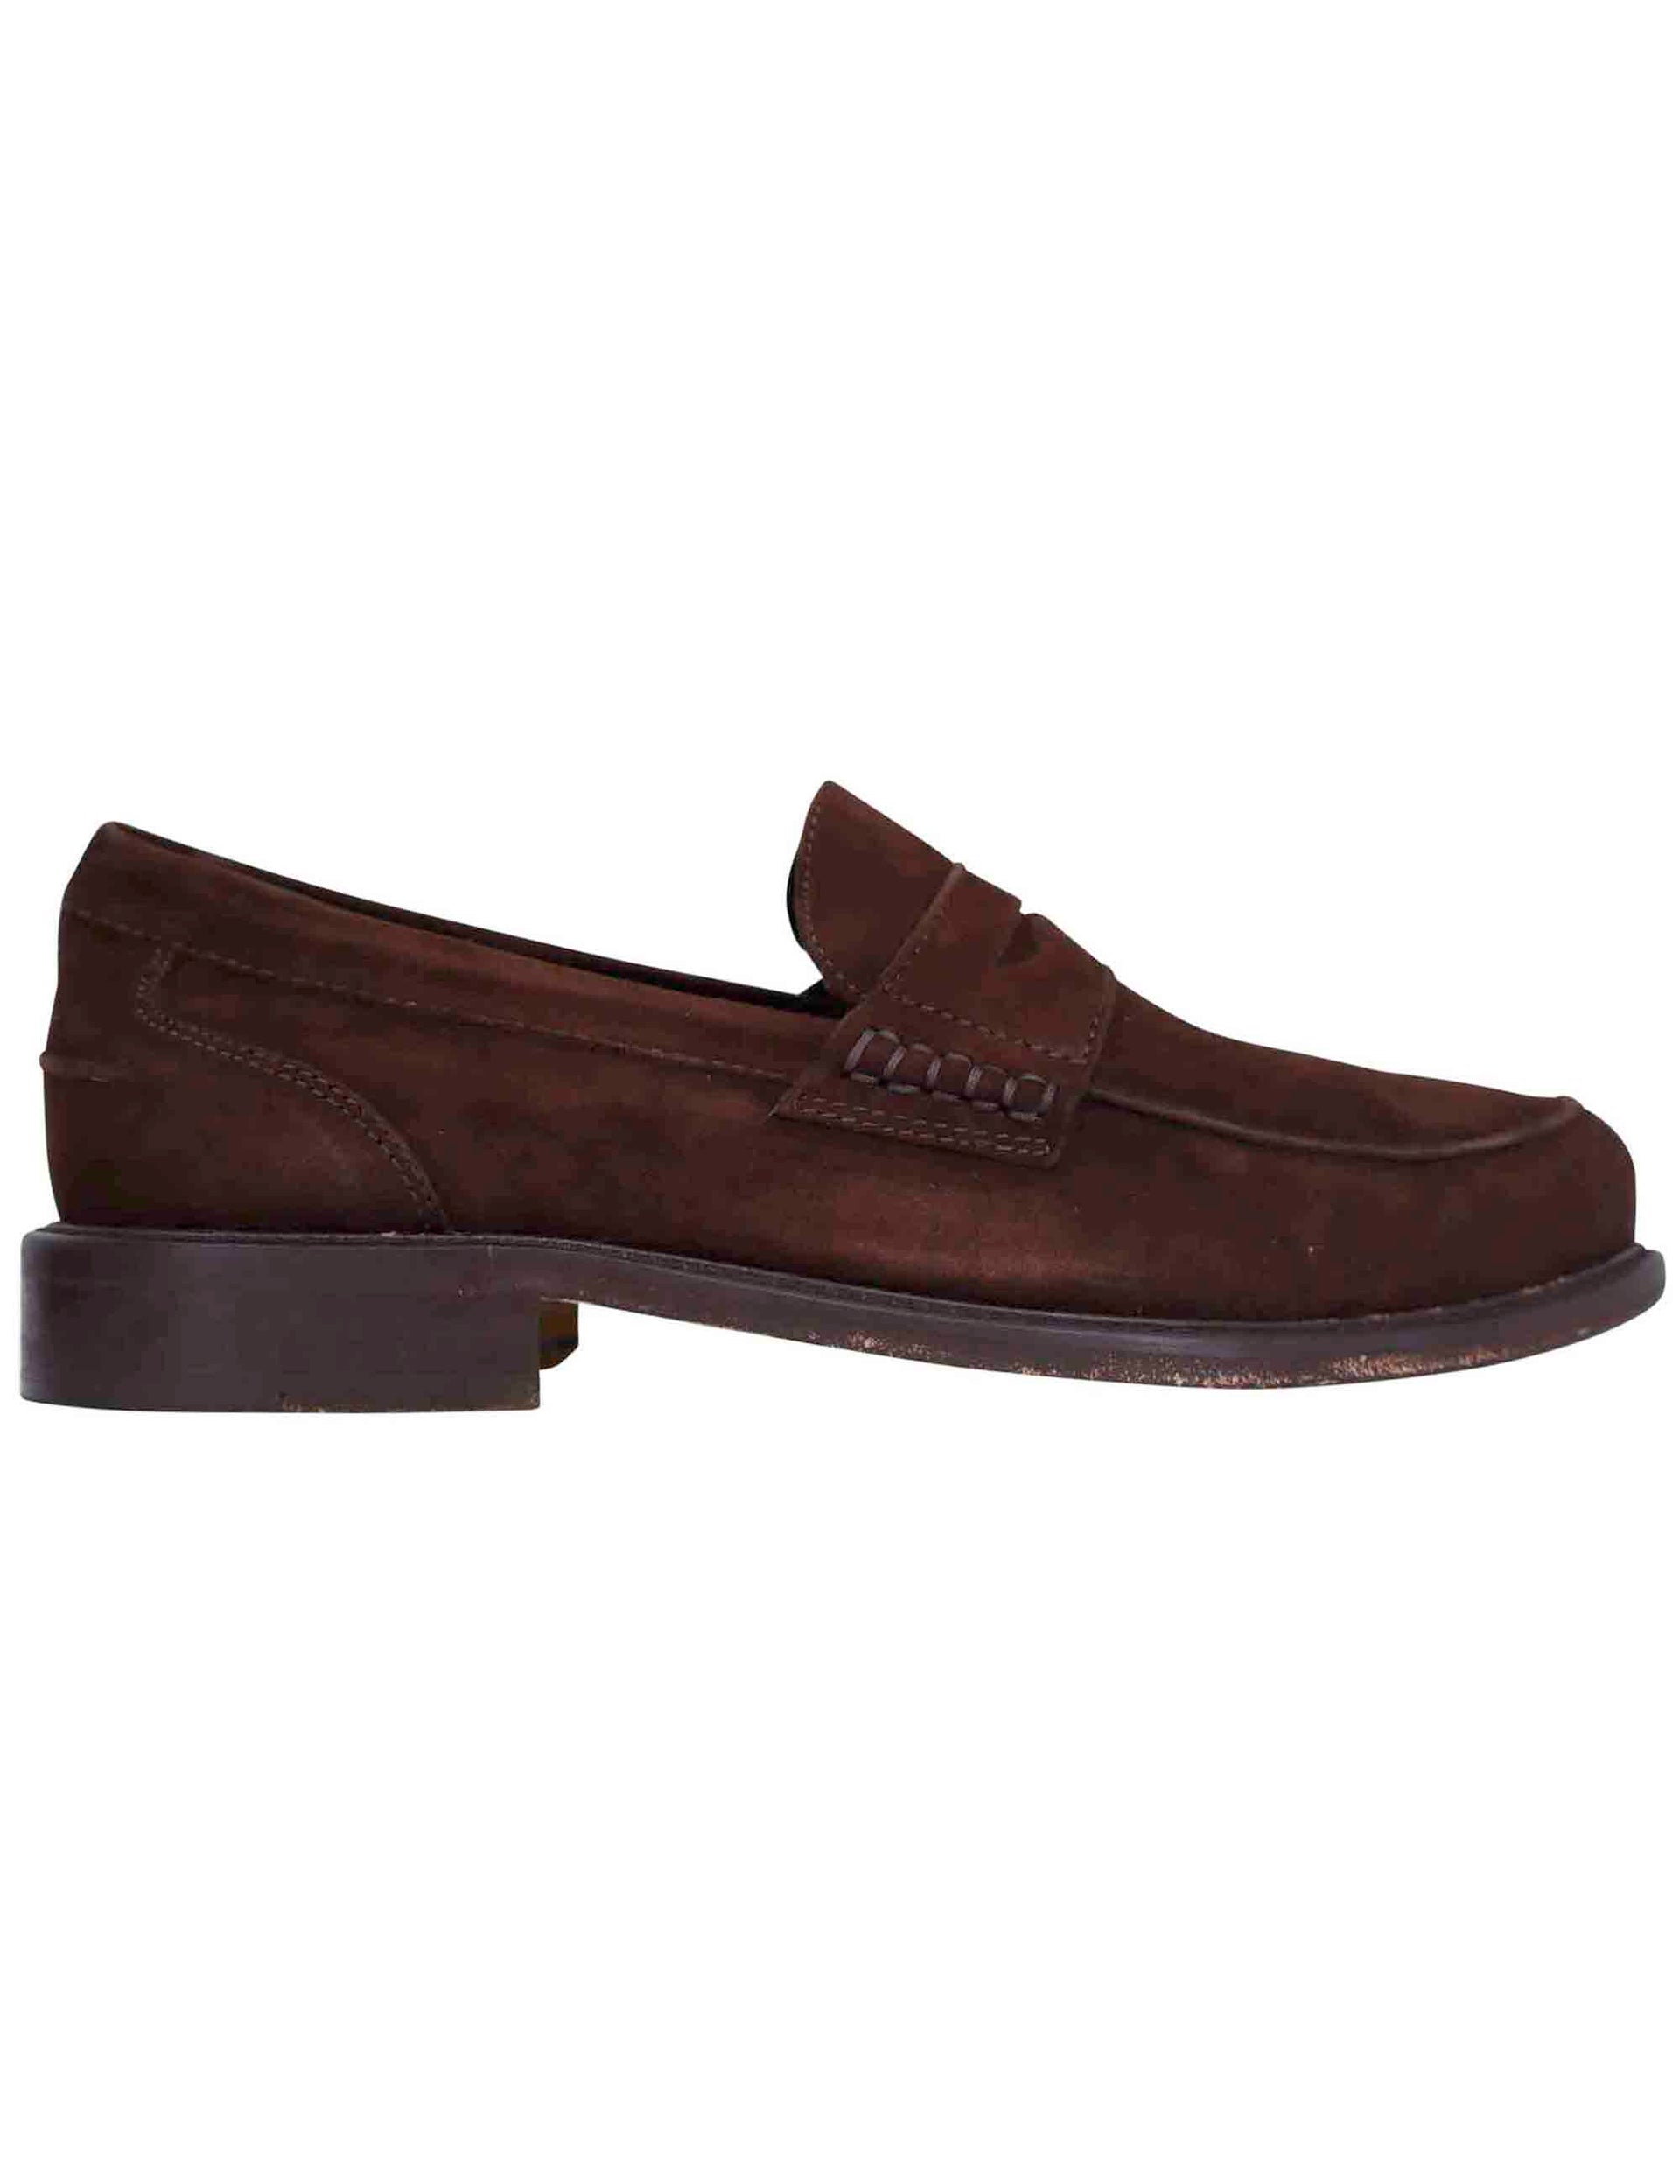 Men's moccasins in dark brown suede with stitched leather sole